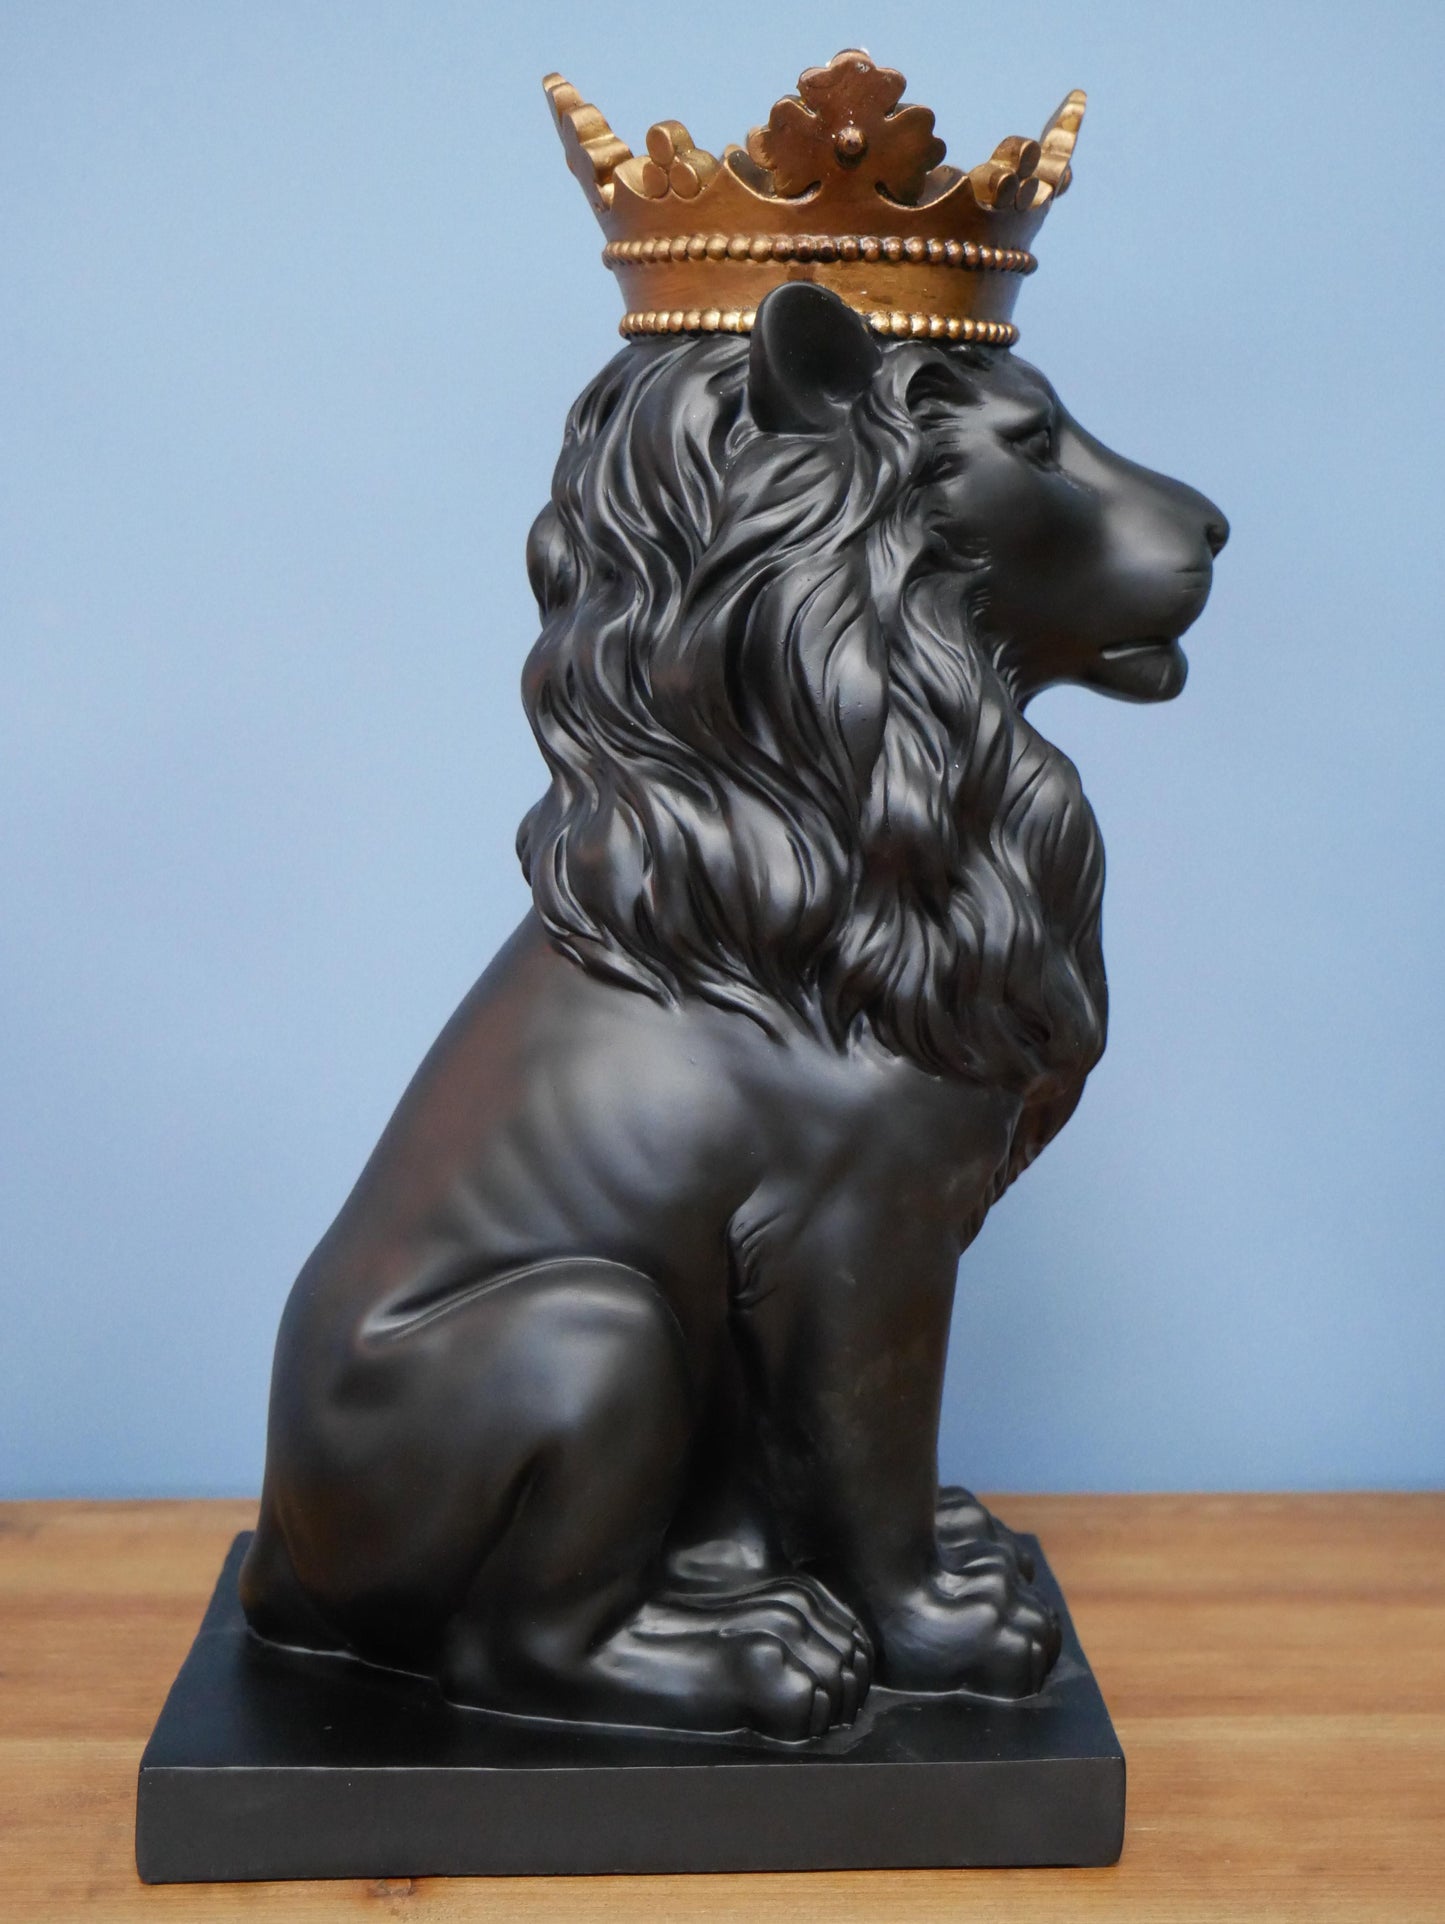 Lion With Crown